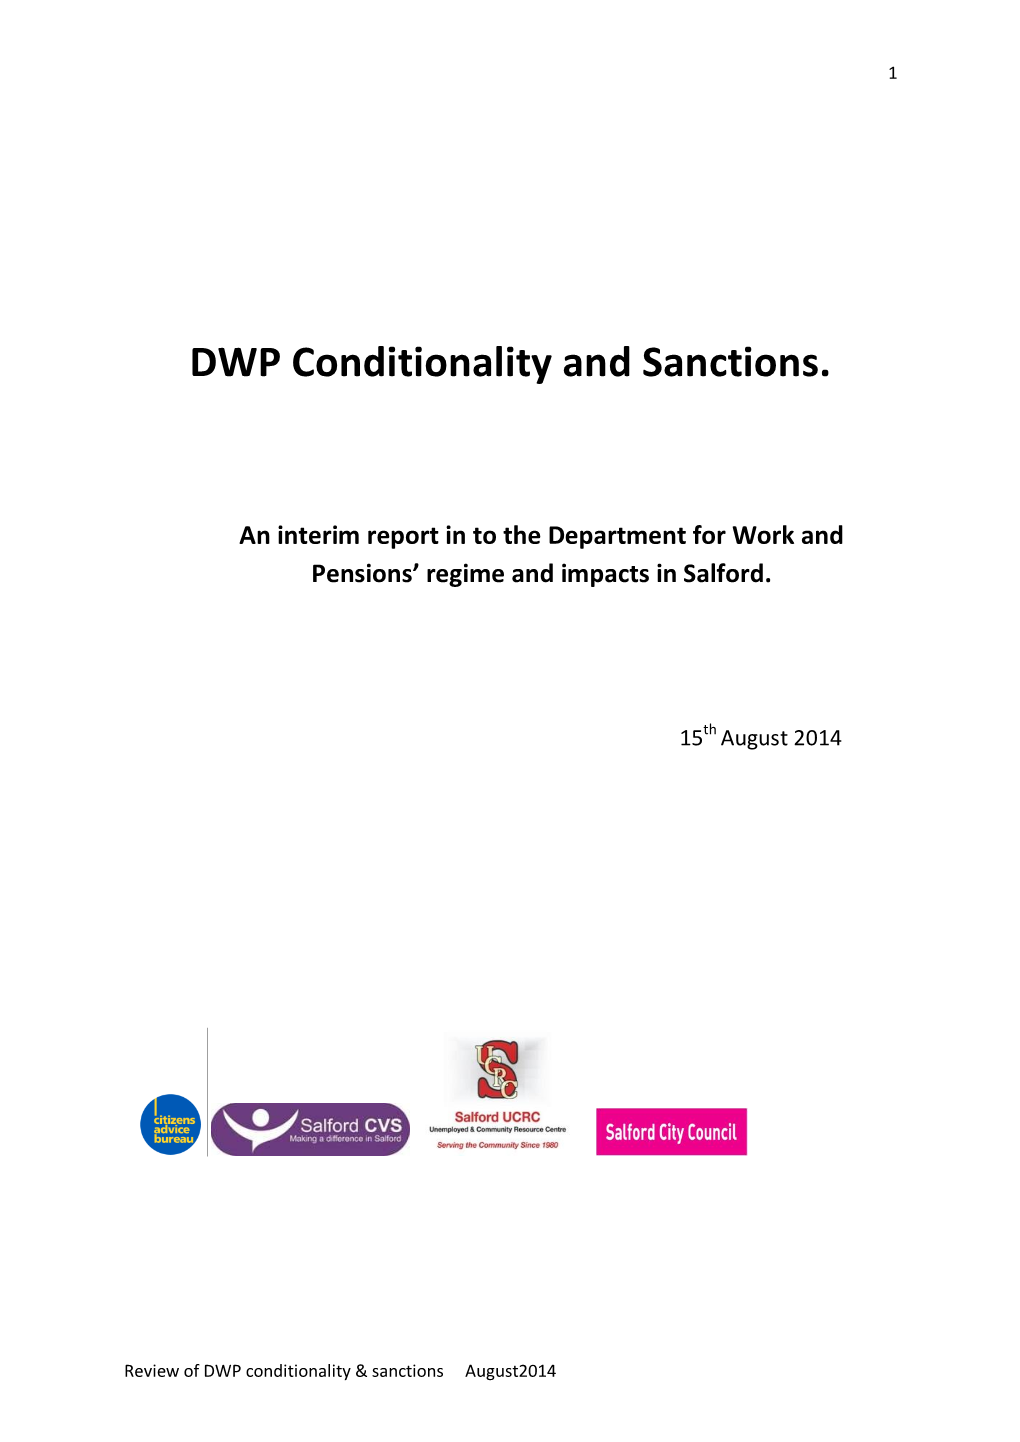 DWP Conditionality and Sanctions: an Interim Report in to the DWP's Regime and Impacts in Salford